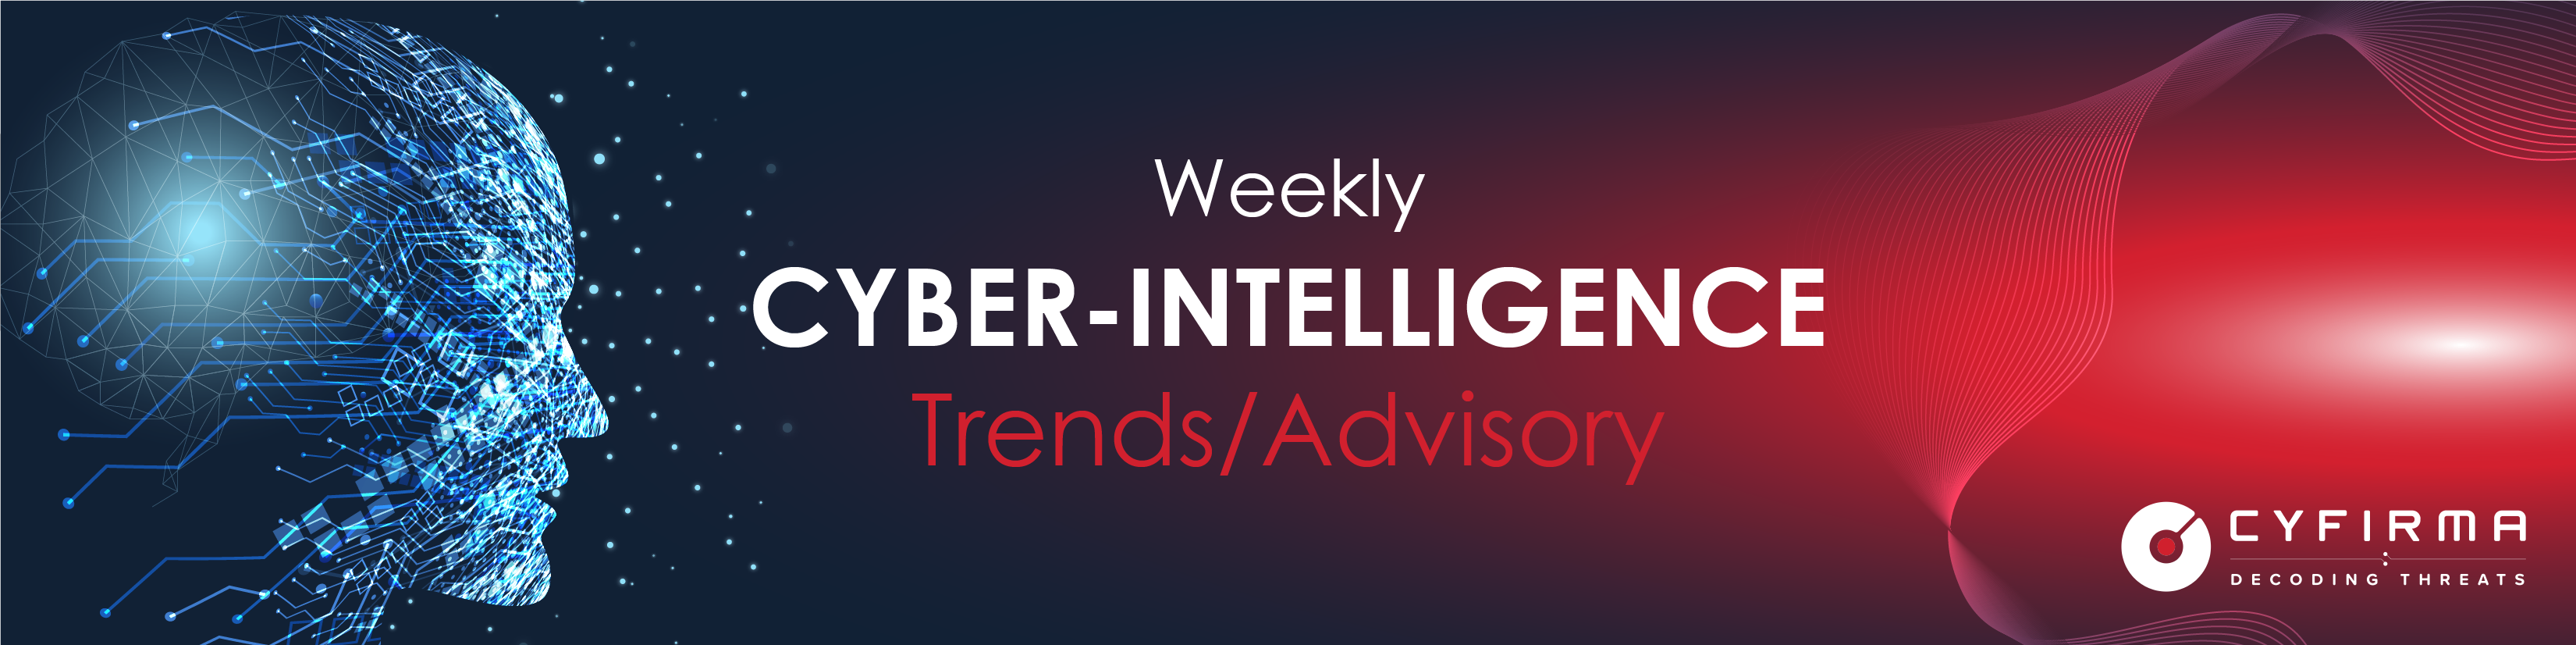 Weekly Intelligence Trends and Advisory | Threat Actor in Focus | Rise in Malware, Ransomware, Phishing | Vulnerability and Exploits – 5 Dec 2021